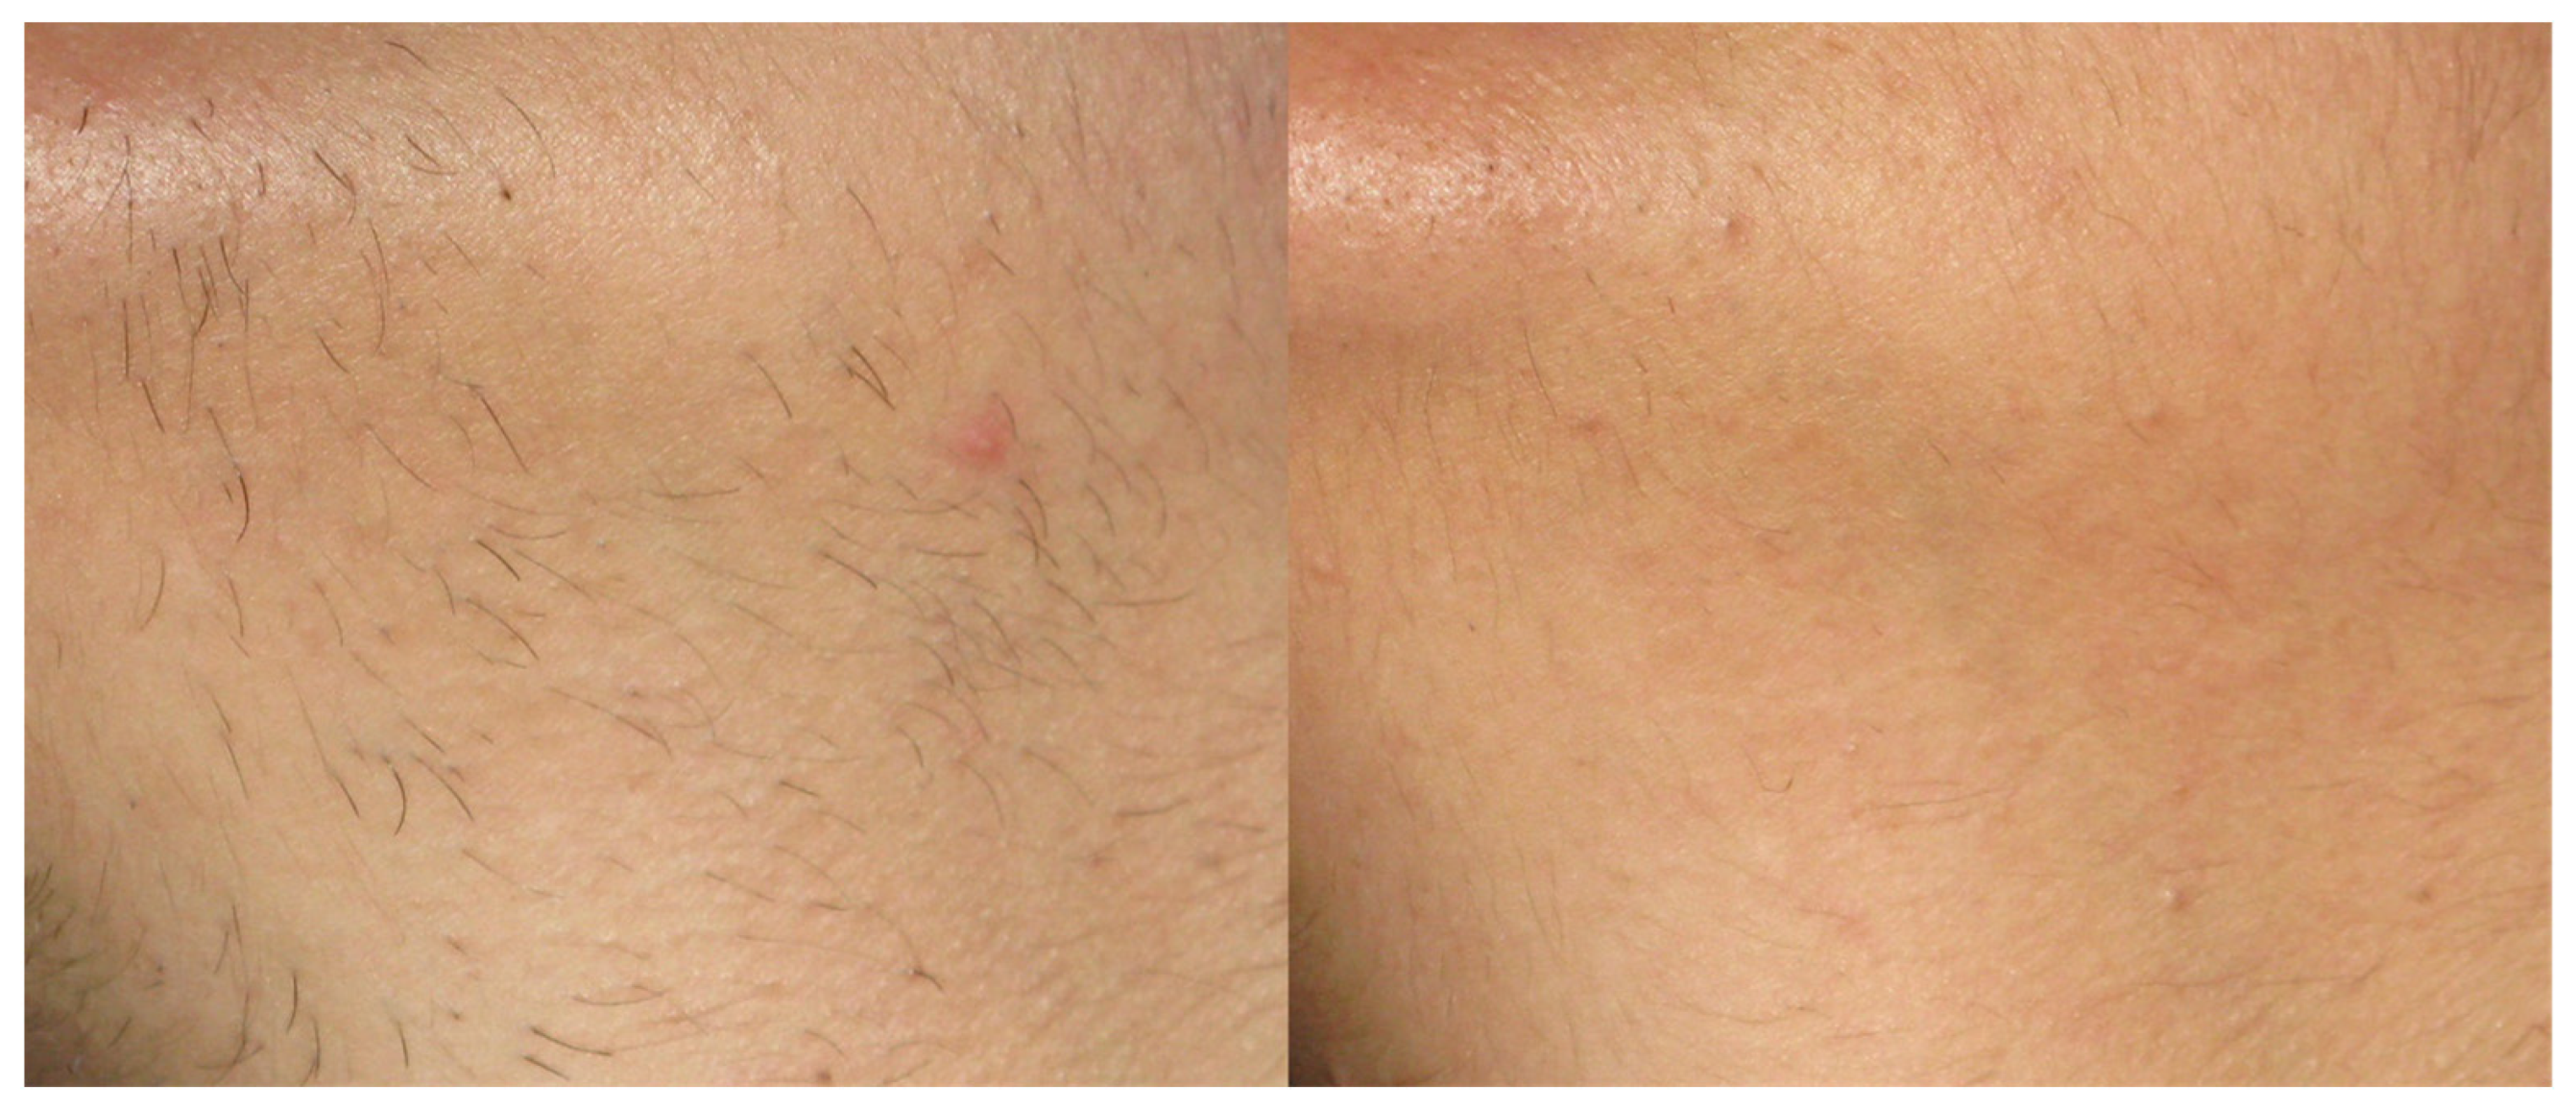 Views of a female groin (flashlamp treatment) before treatment (left)